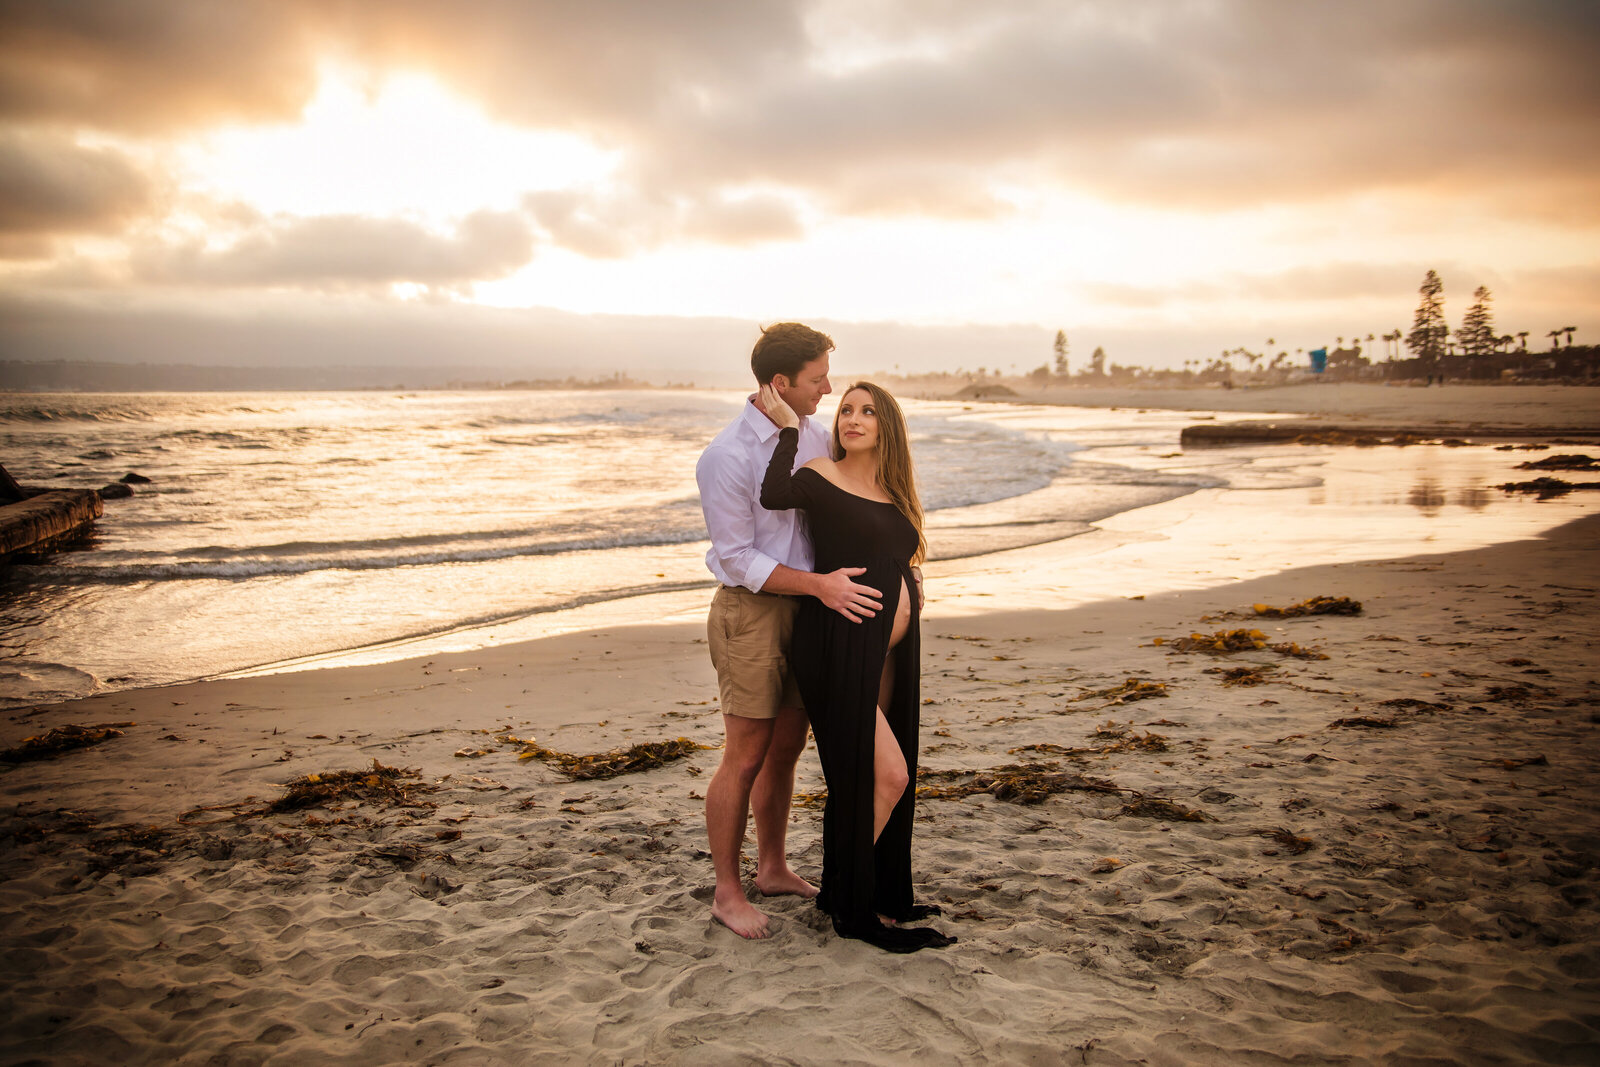 Maternity Photographer, a couple holds each other at the beach at sunset, she is pregnant